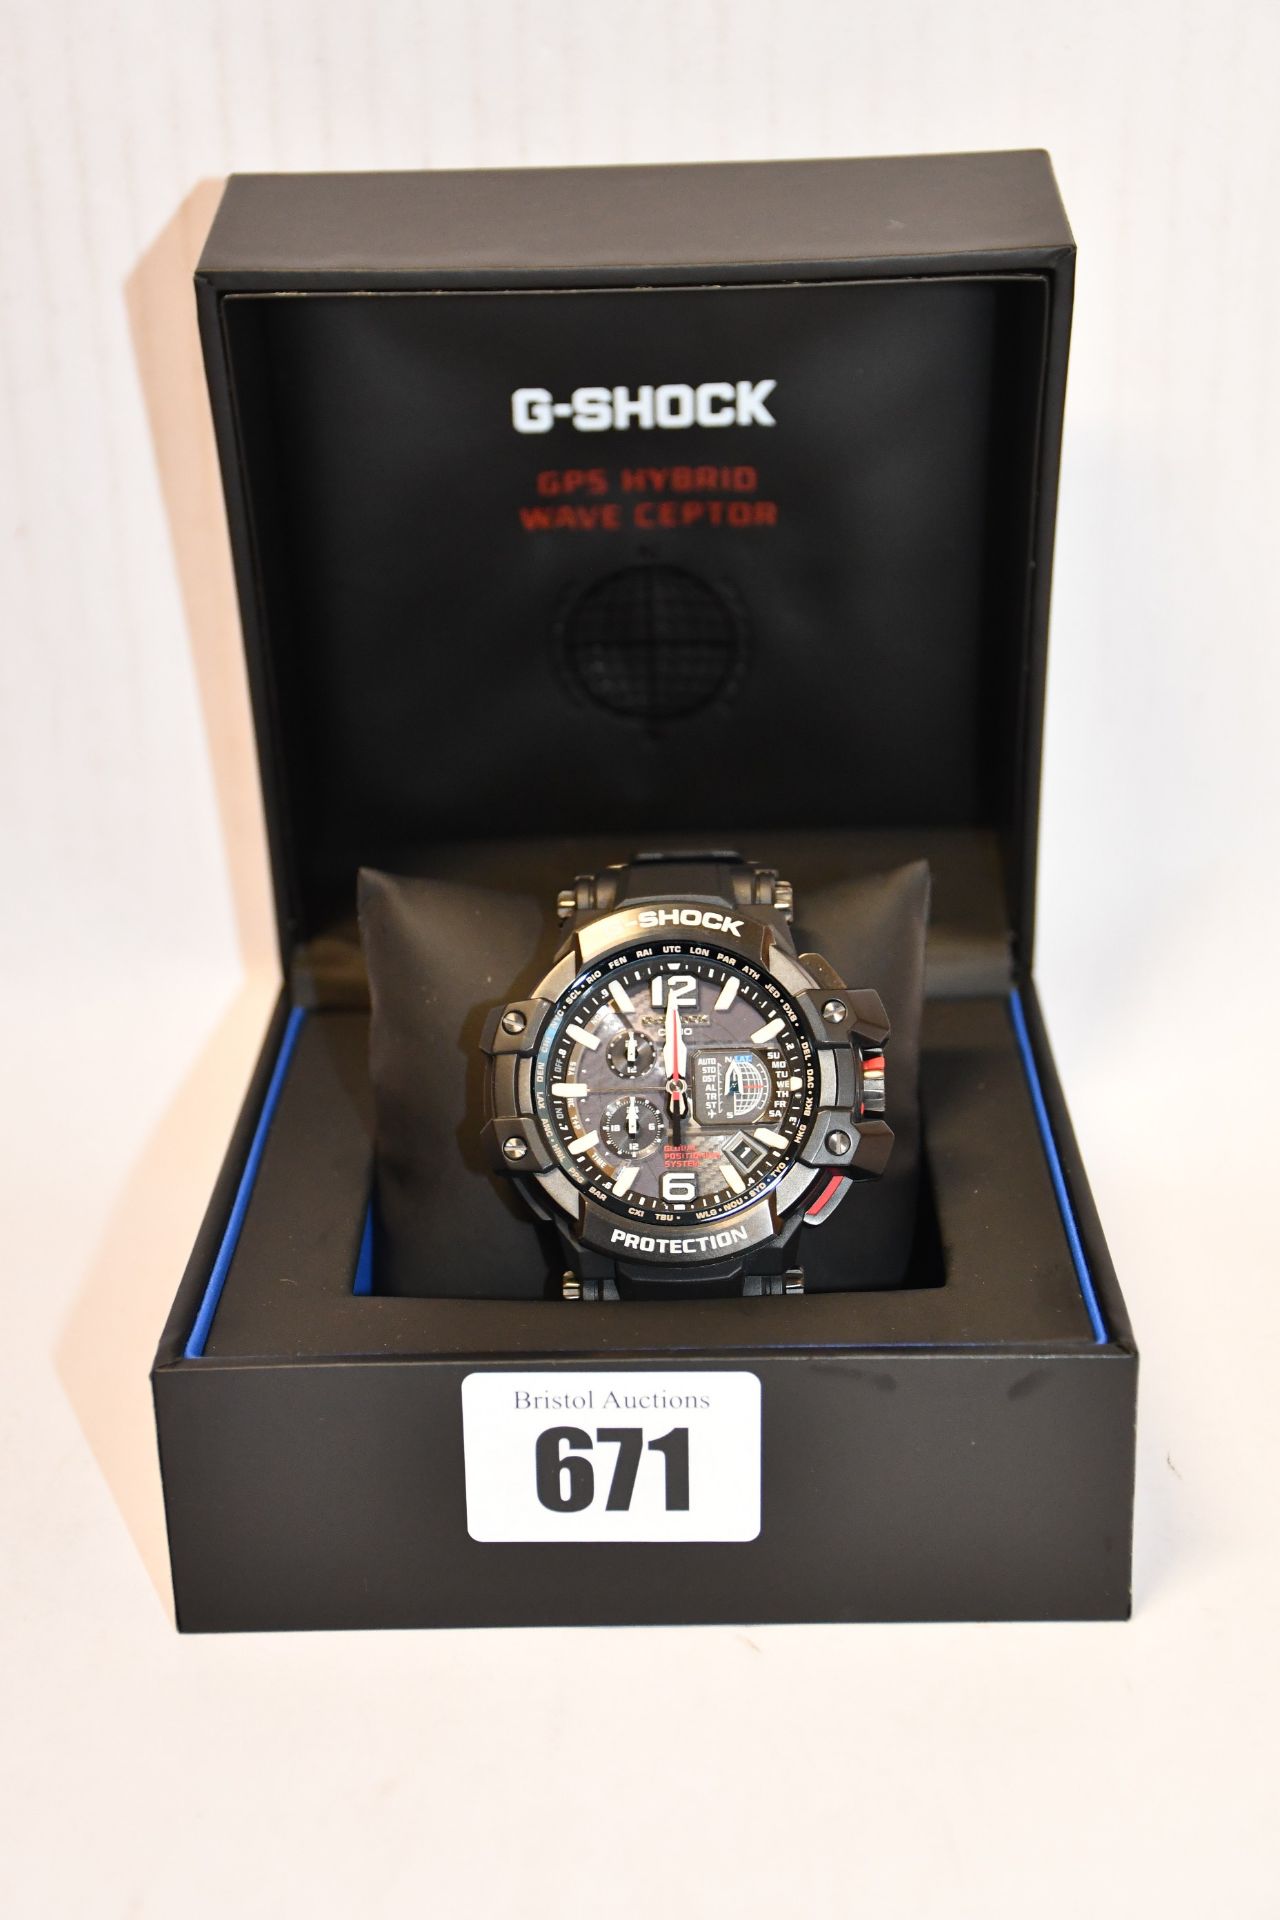 A boxed as new Casio G-Shock Protection tough solar water resistant watch (GPW100).